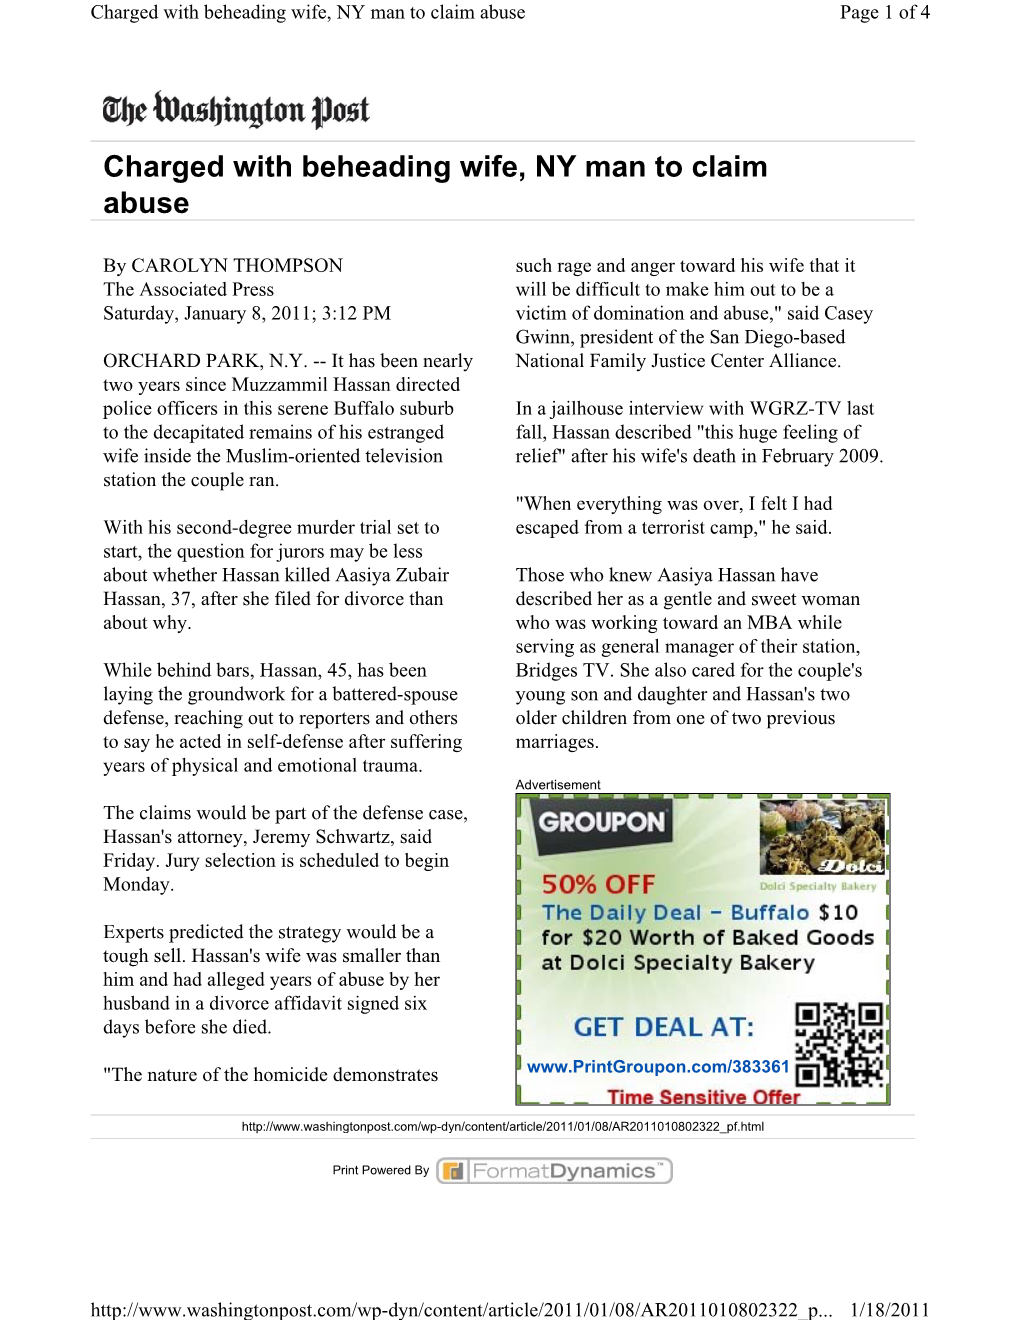 Charged with Beheading Wife, NY Man to Claim Abuse Page 1 of 4